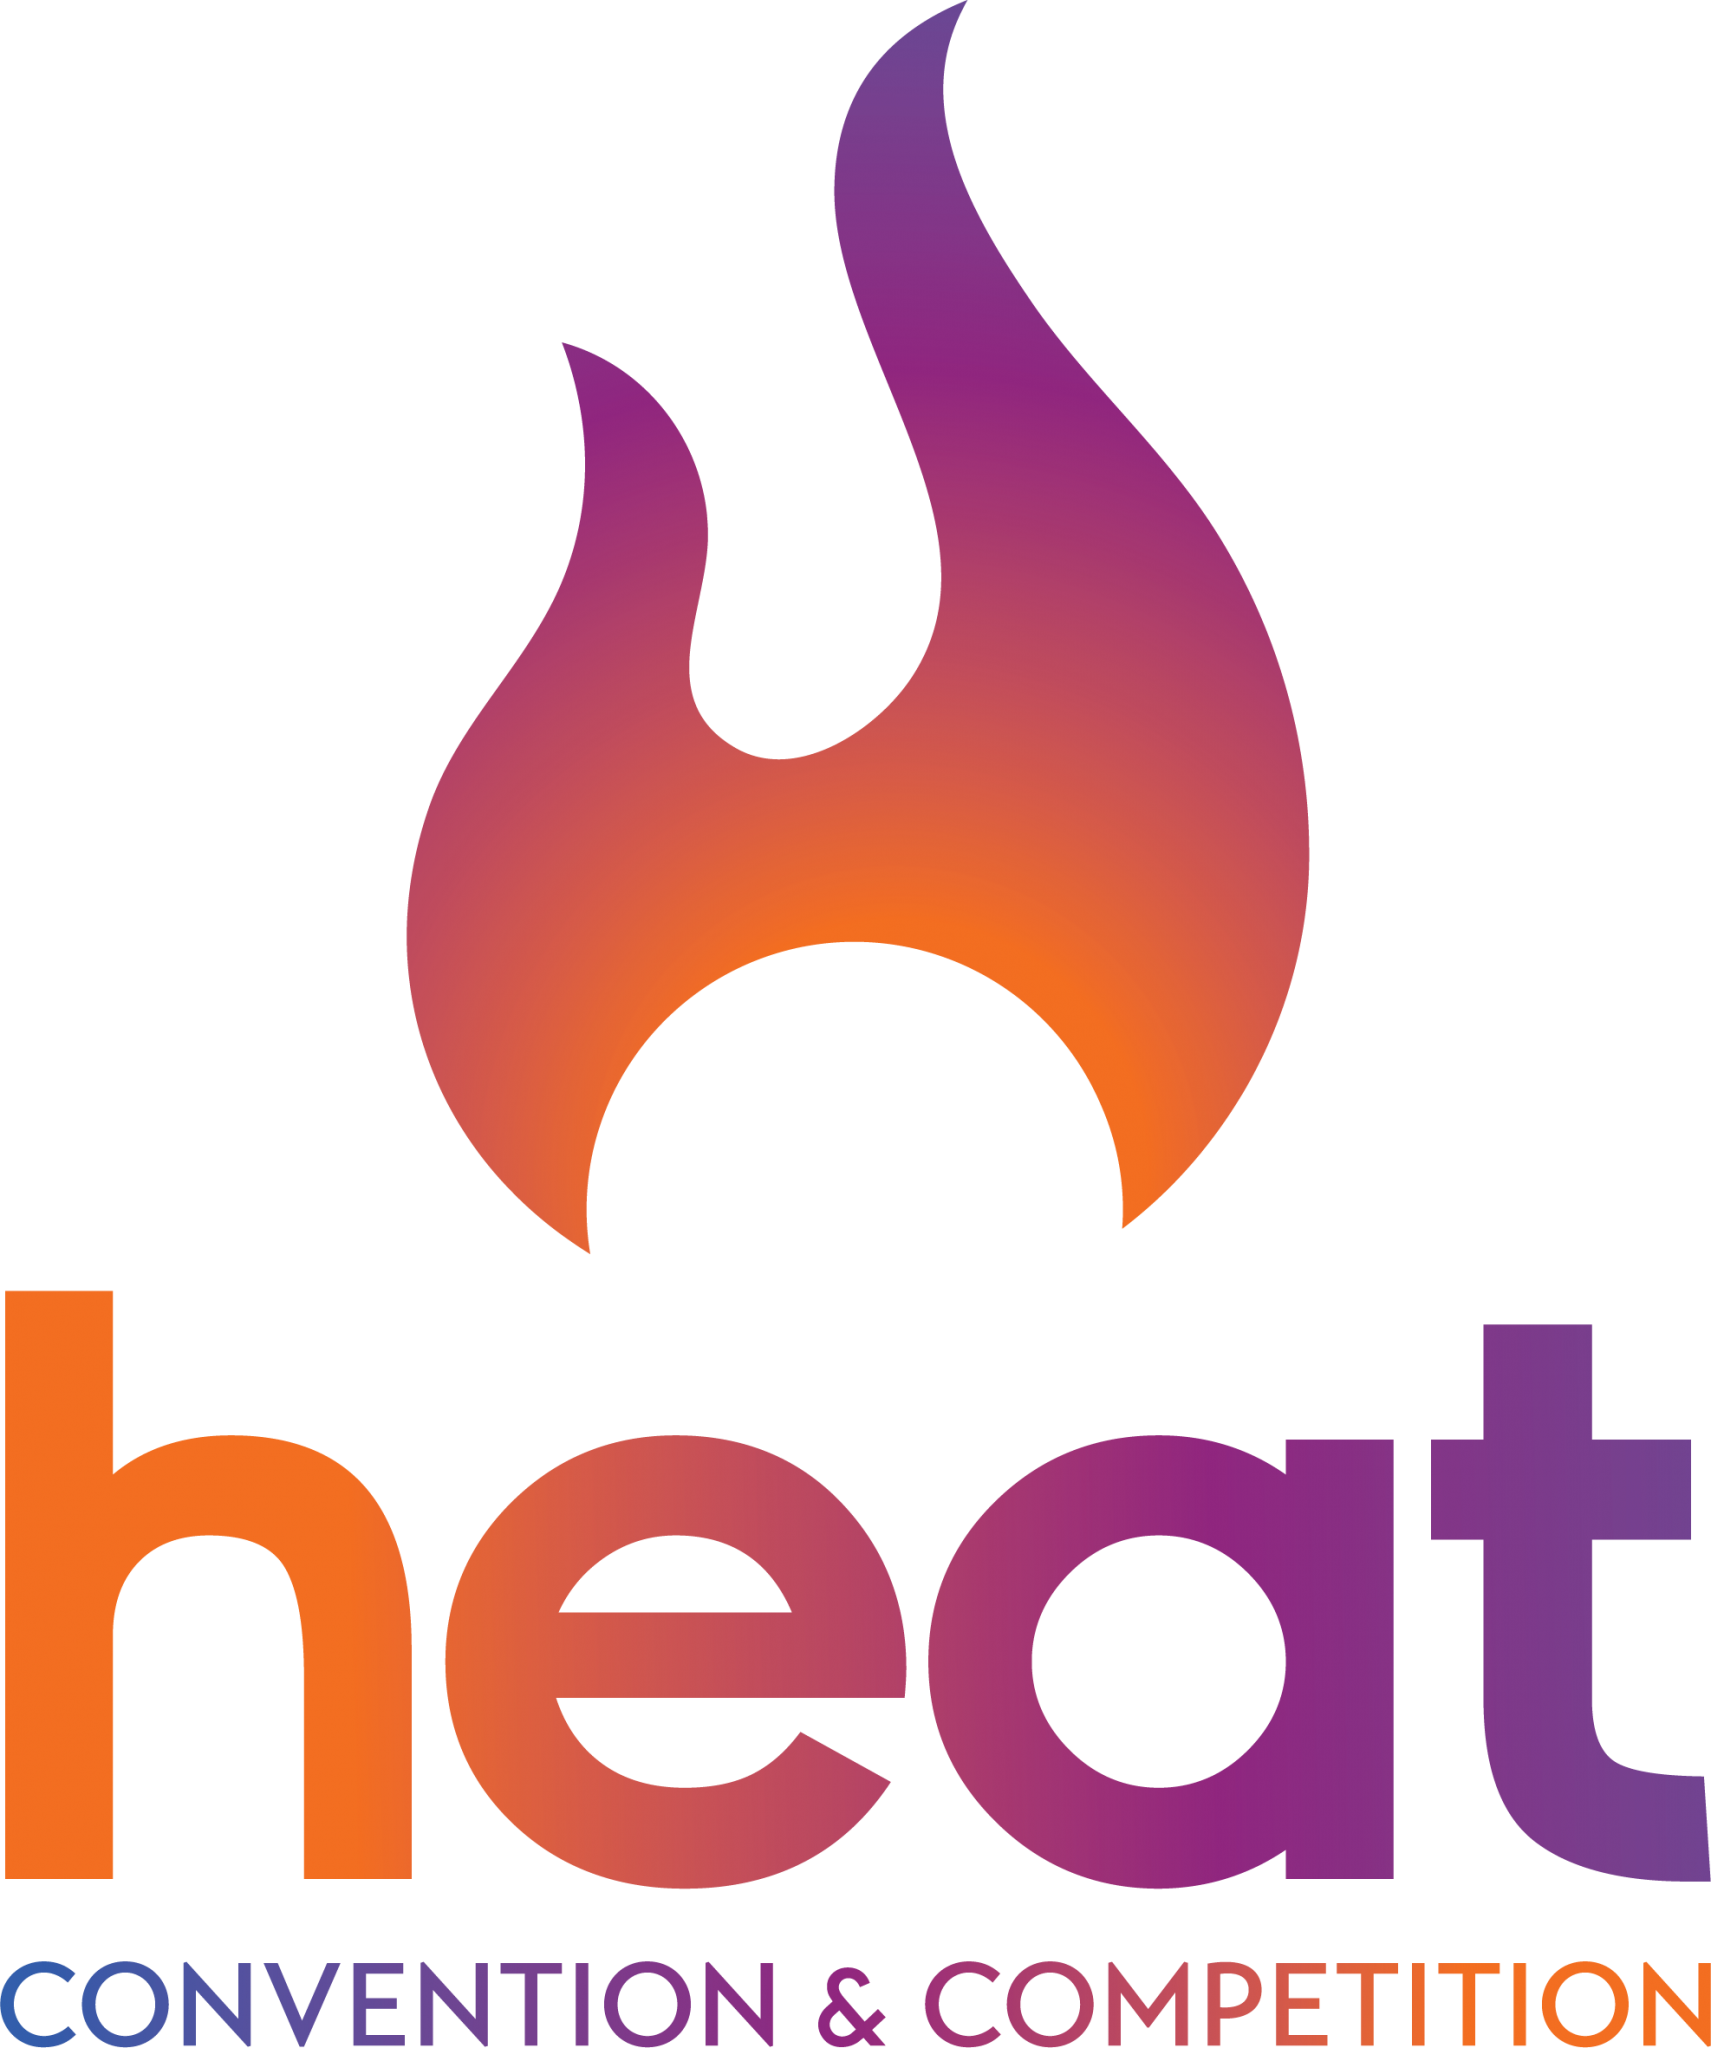 Heat_Logo Full (1) HEAT CONVENTION & COMPETITION